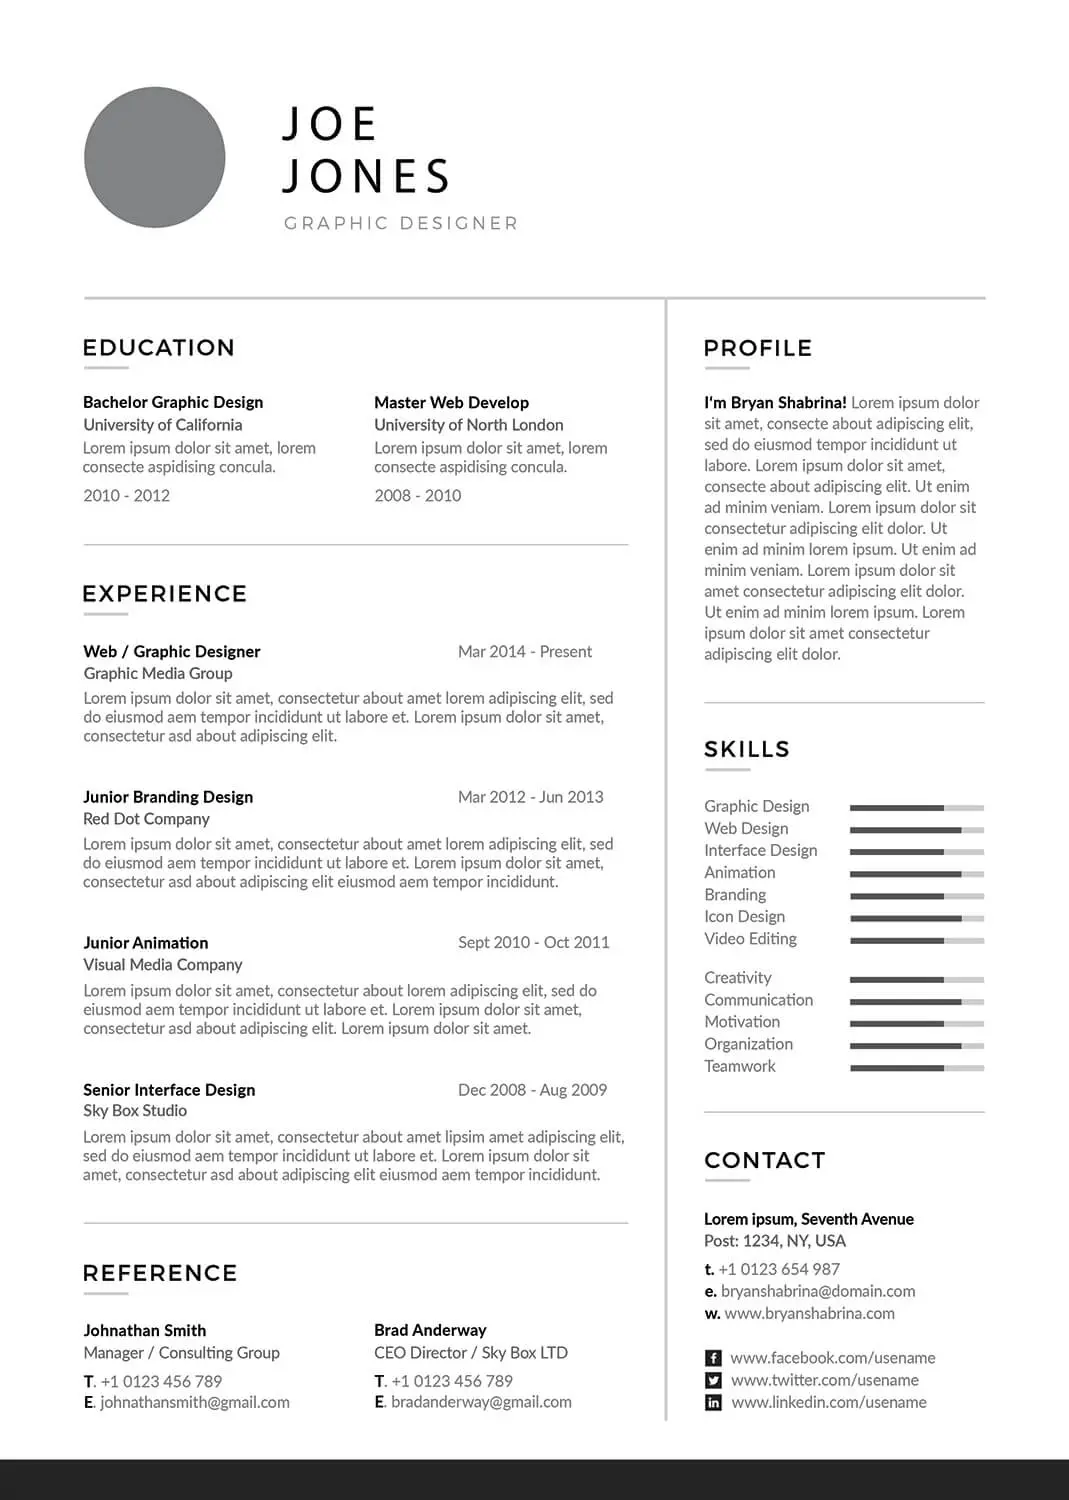 sports-and-fitness-resume